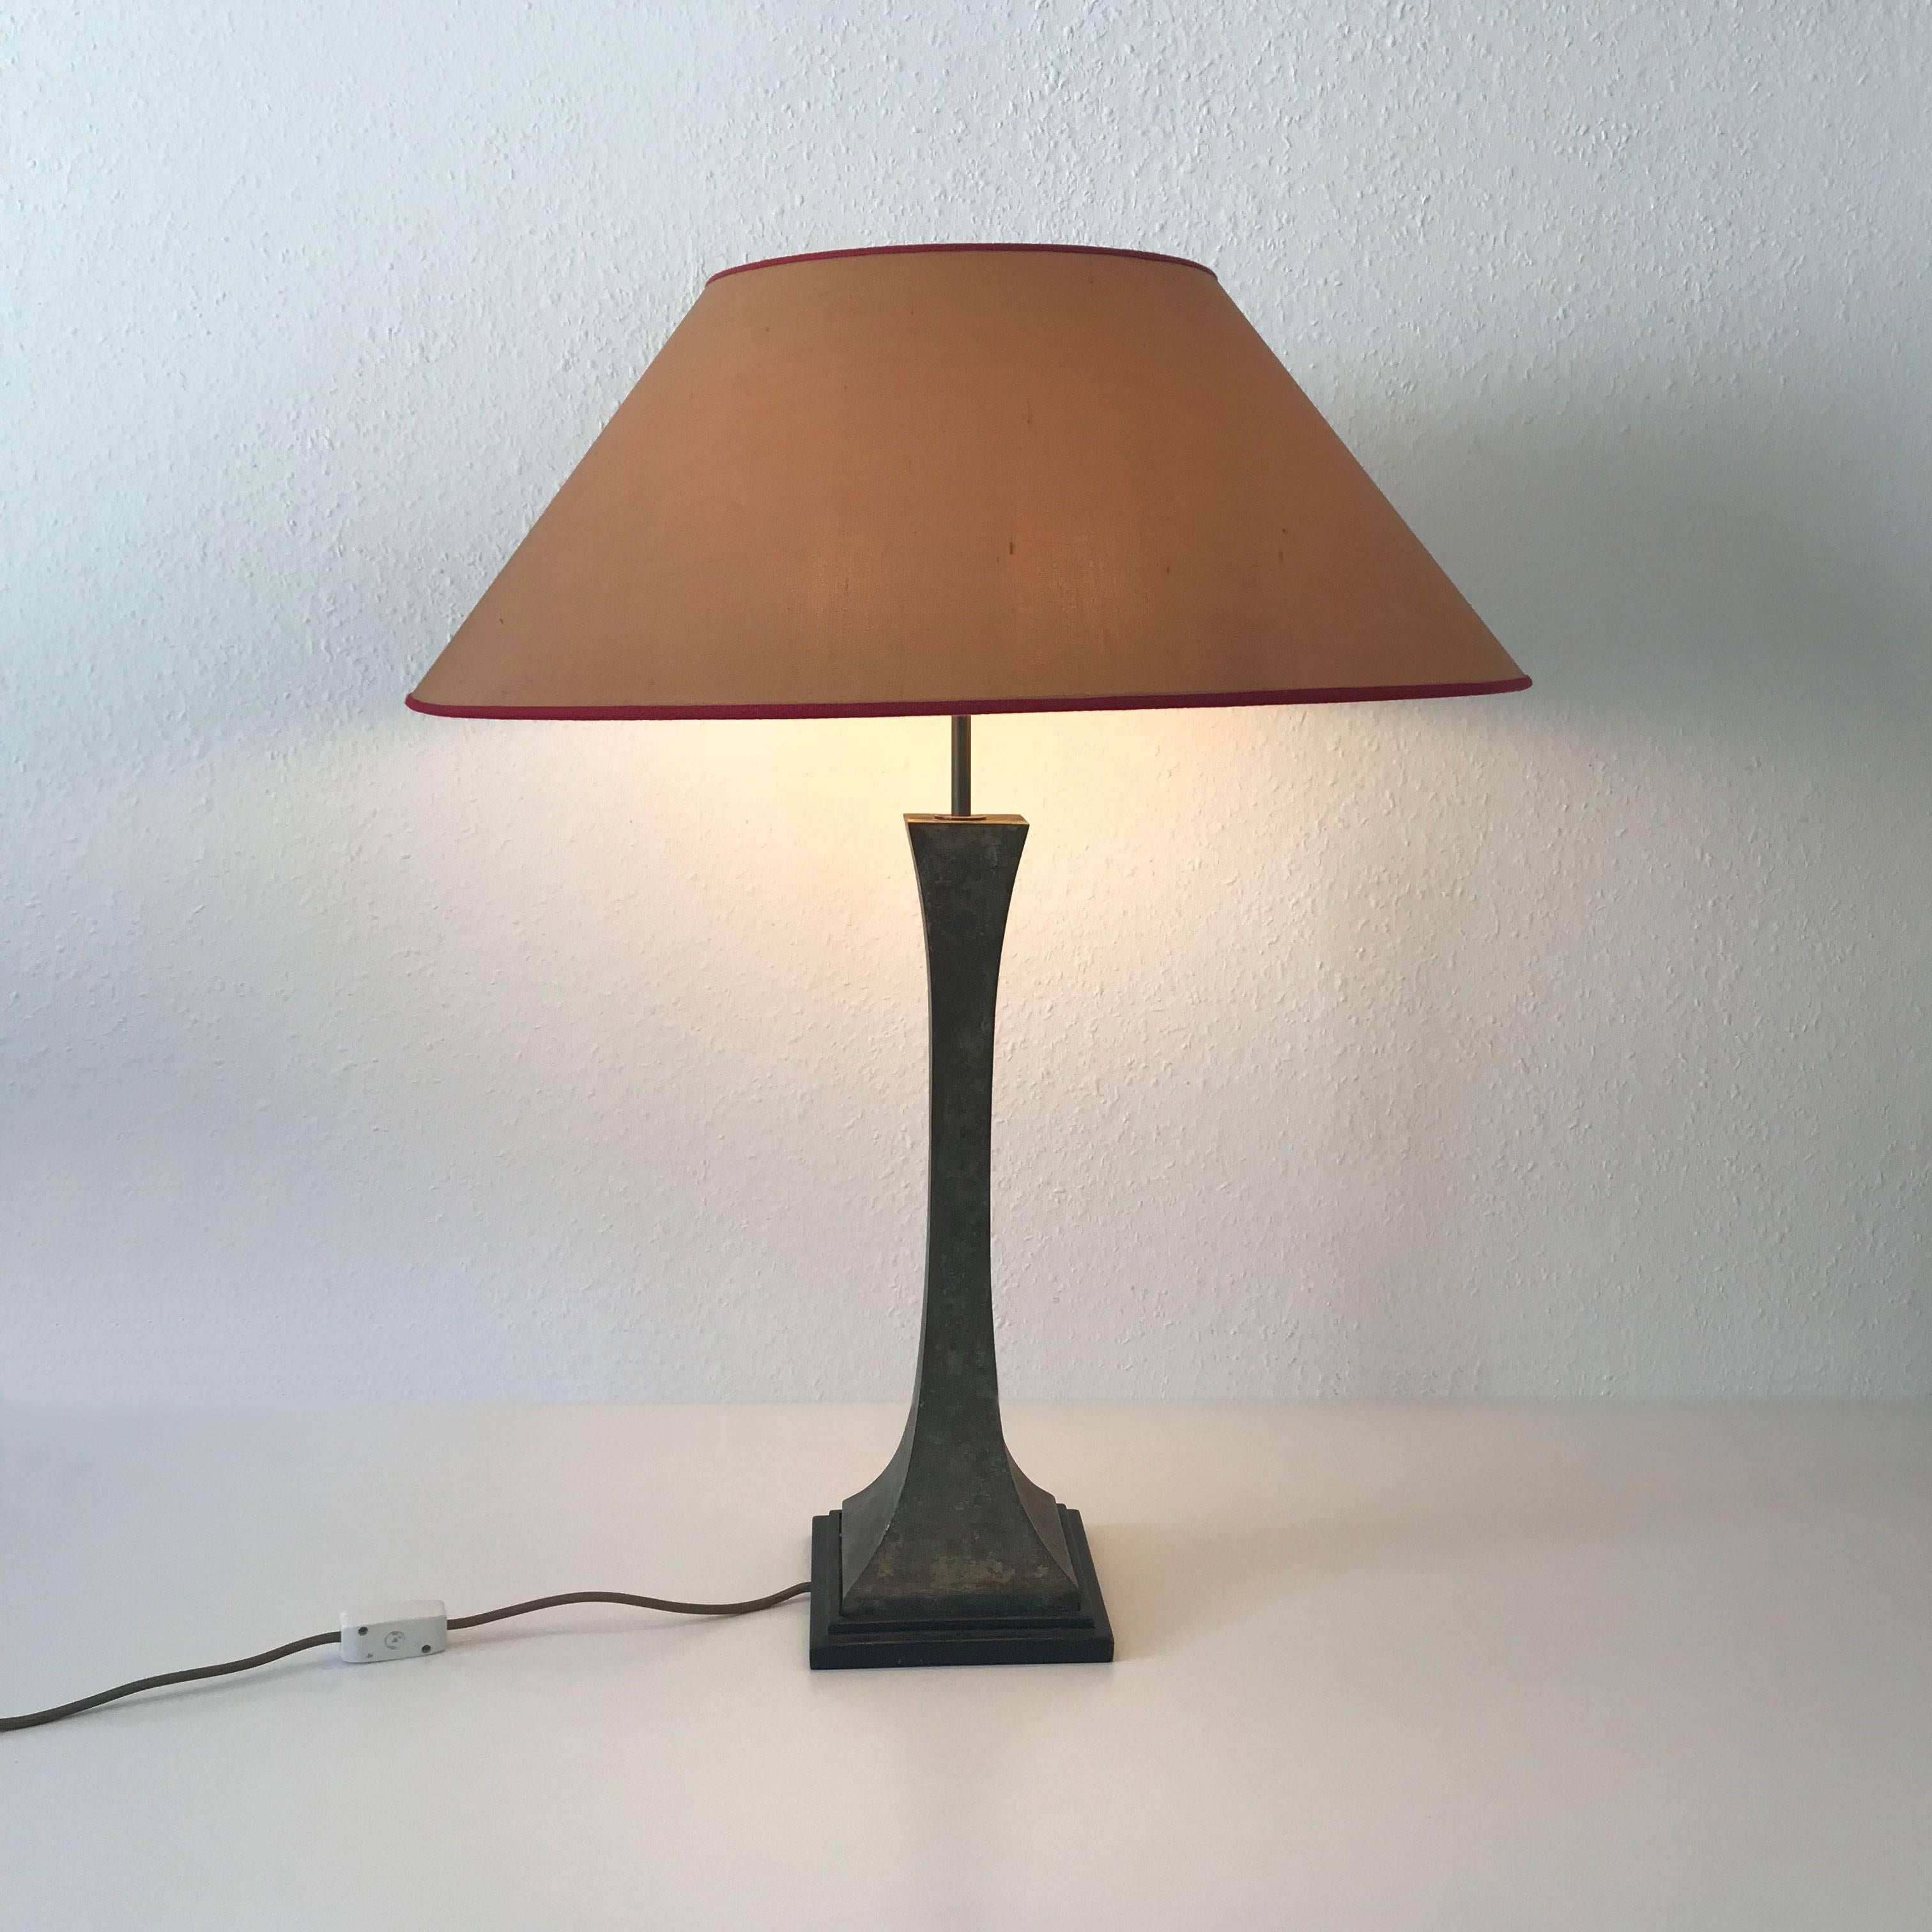 Exceptional Mid-Century Modern bronze Verdigris table lamp. Designed by Stewart Ross James and manufactured by Hansen Lighting, New York, USA, 1960s.
The lamp is executed with two E27 screw fit bulb holders, wired and in working condition. Delivery